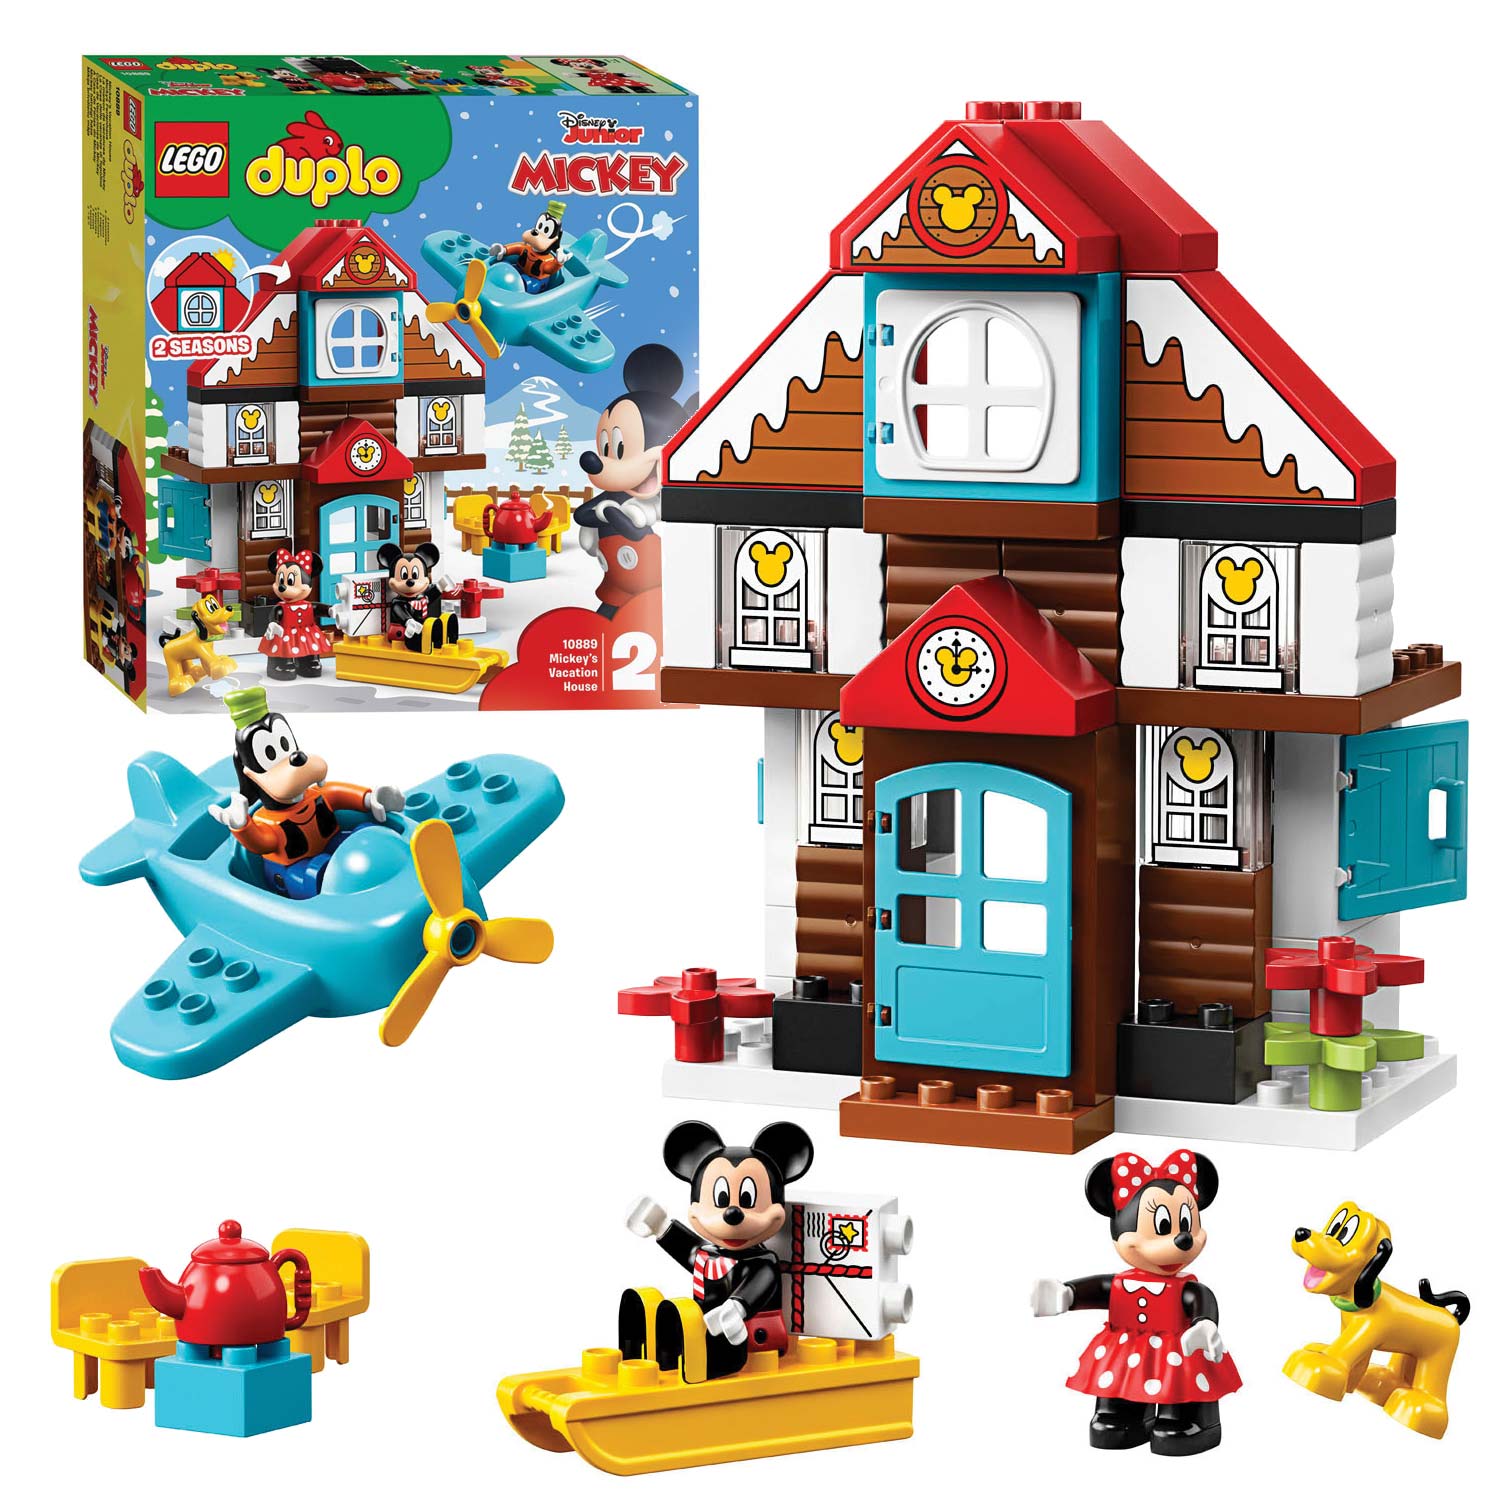 LEGO DUPLO Disney Mickey's Vacation House 10889 Toy House Building Set for  Toddlers with Minnie Mouse, Goofy, Pluto and Mickey Mouse Figures (57